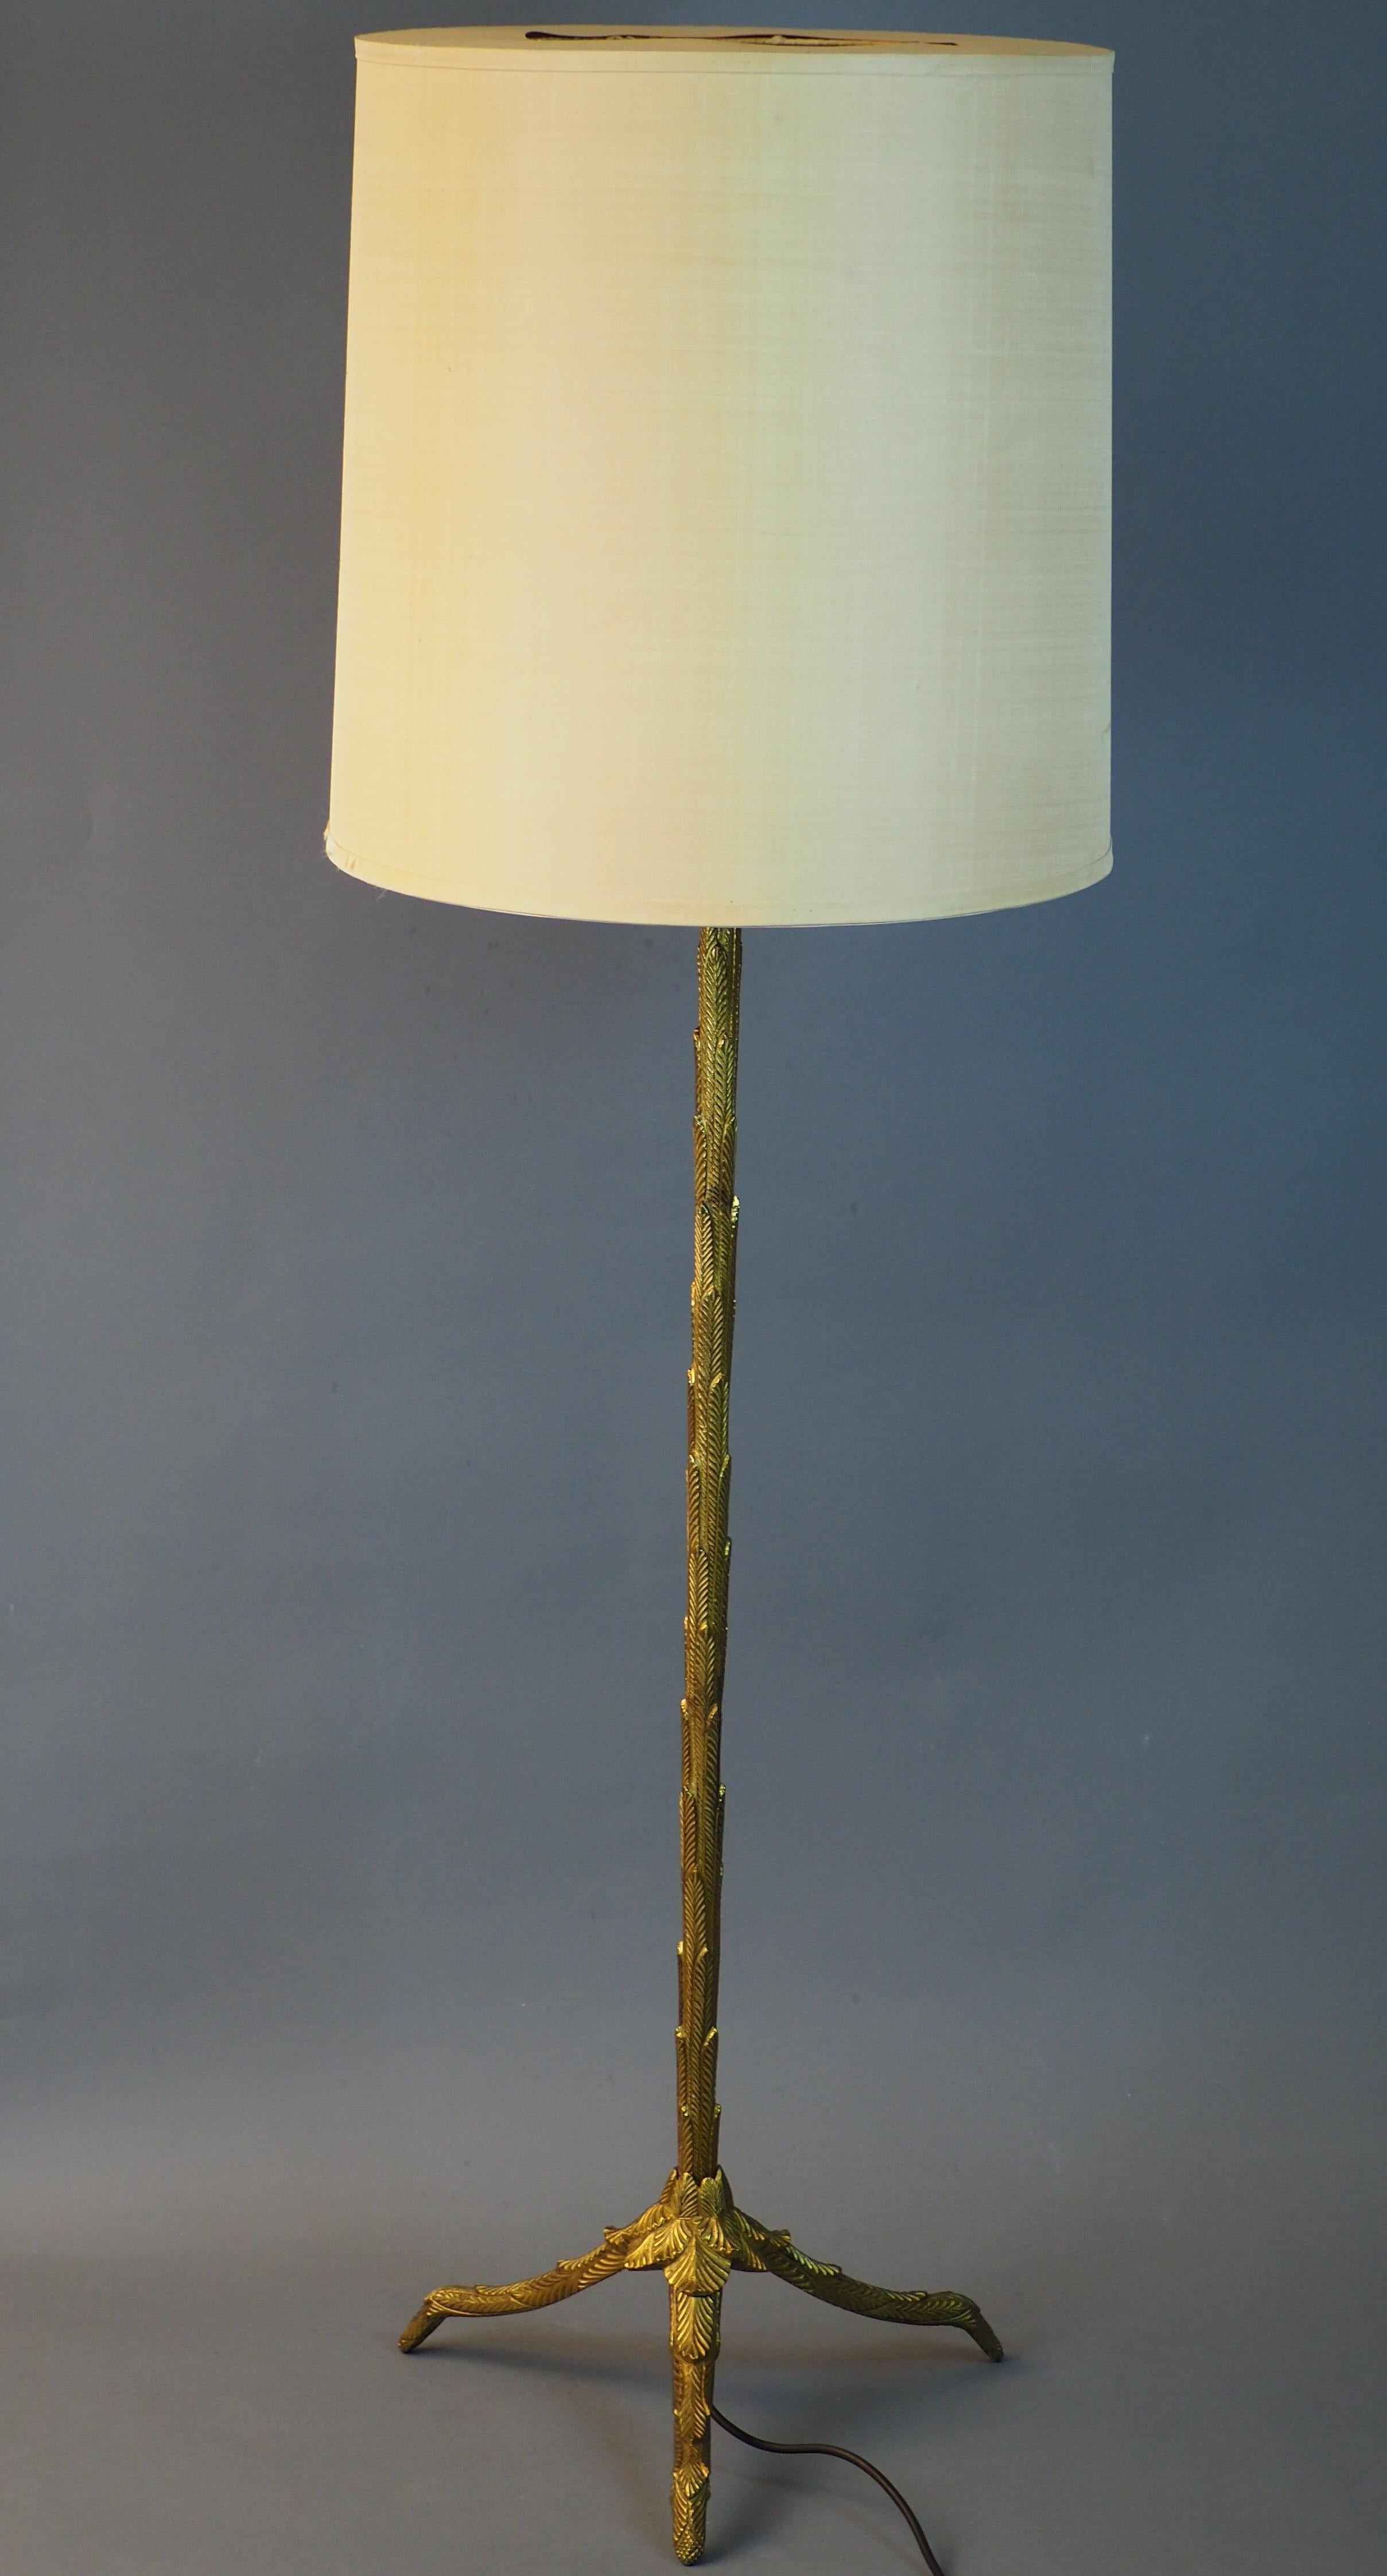 French Gilt Bronze Floor Lamp by Maison Baguès, circa 1950s For Sale 4